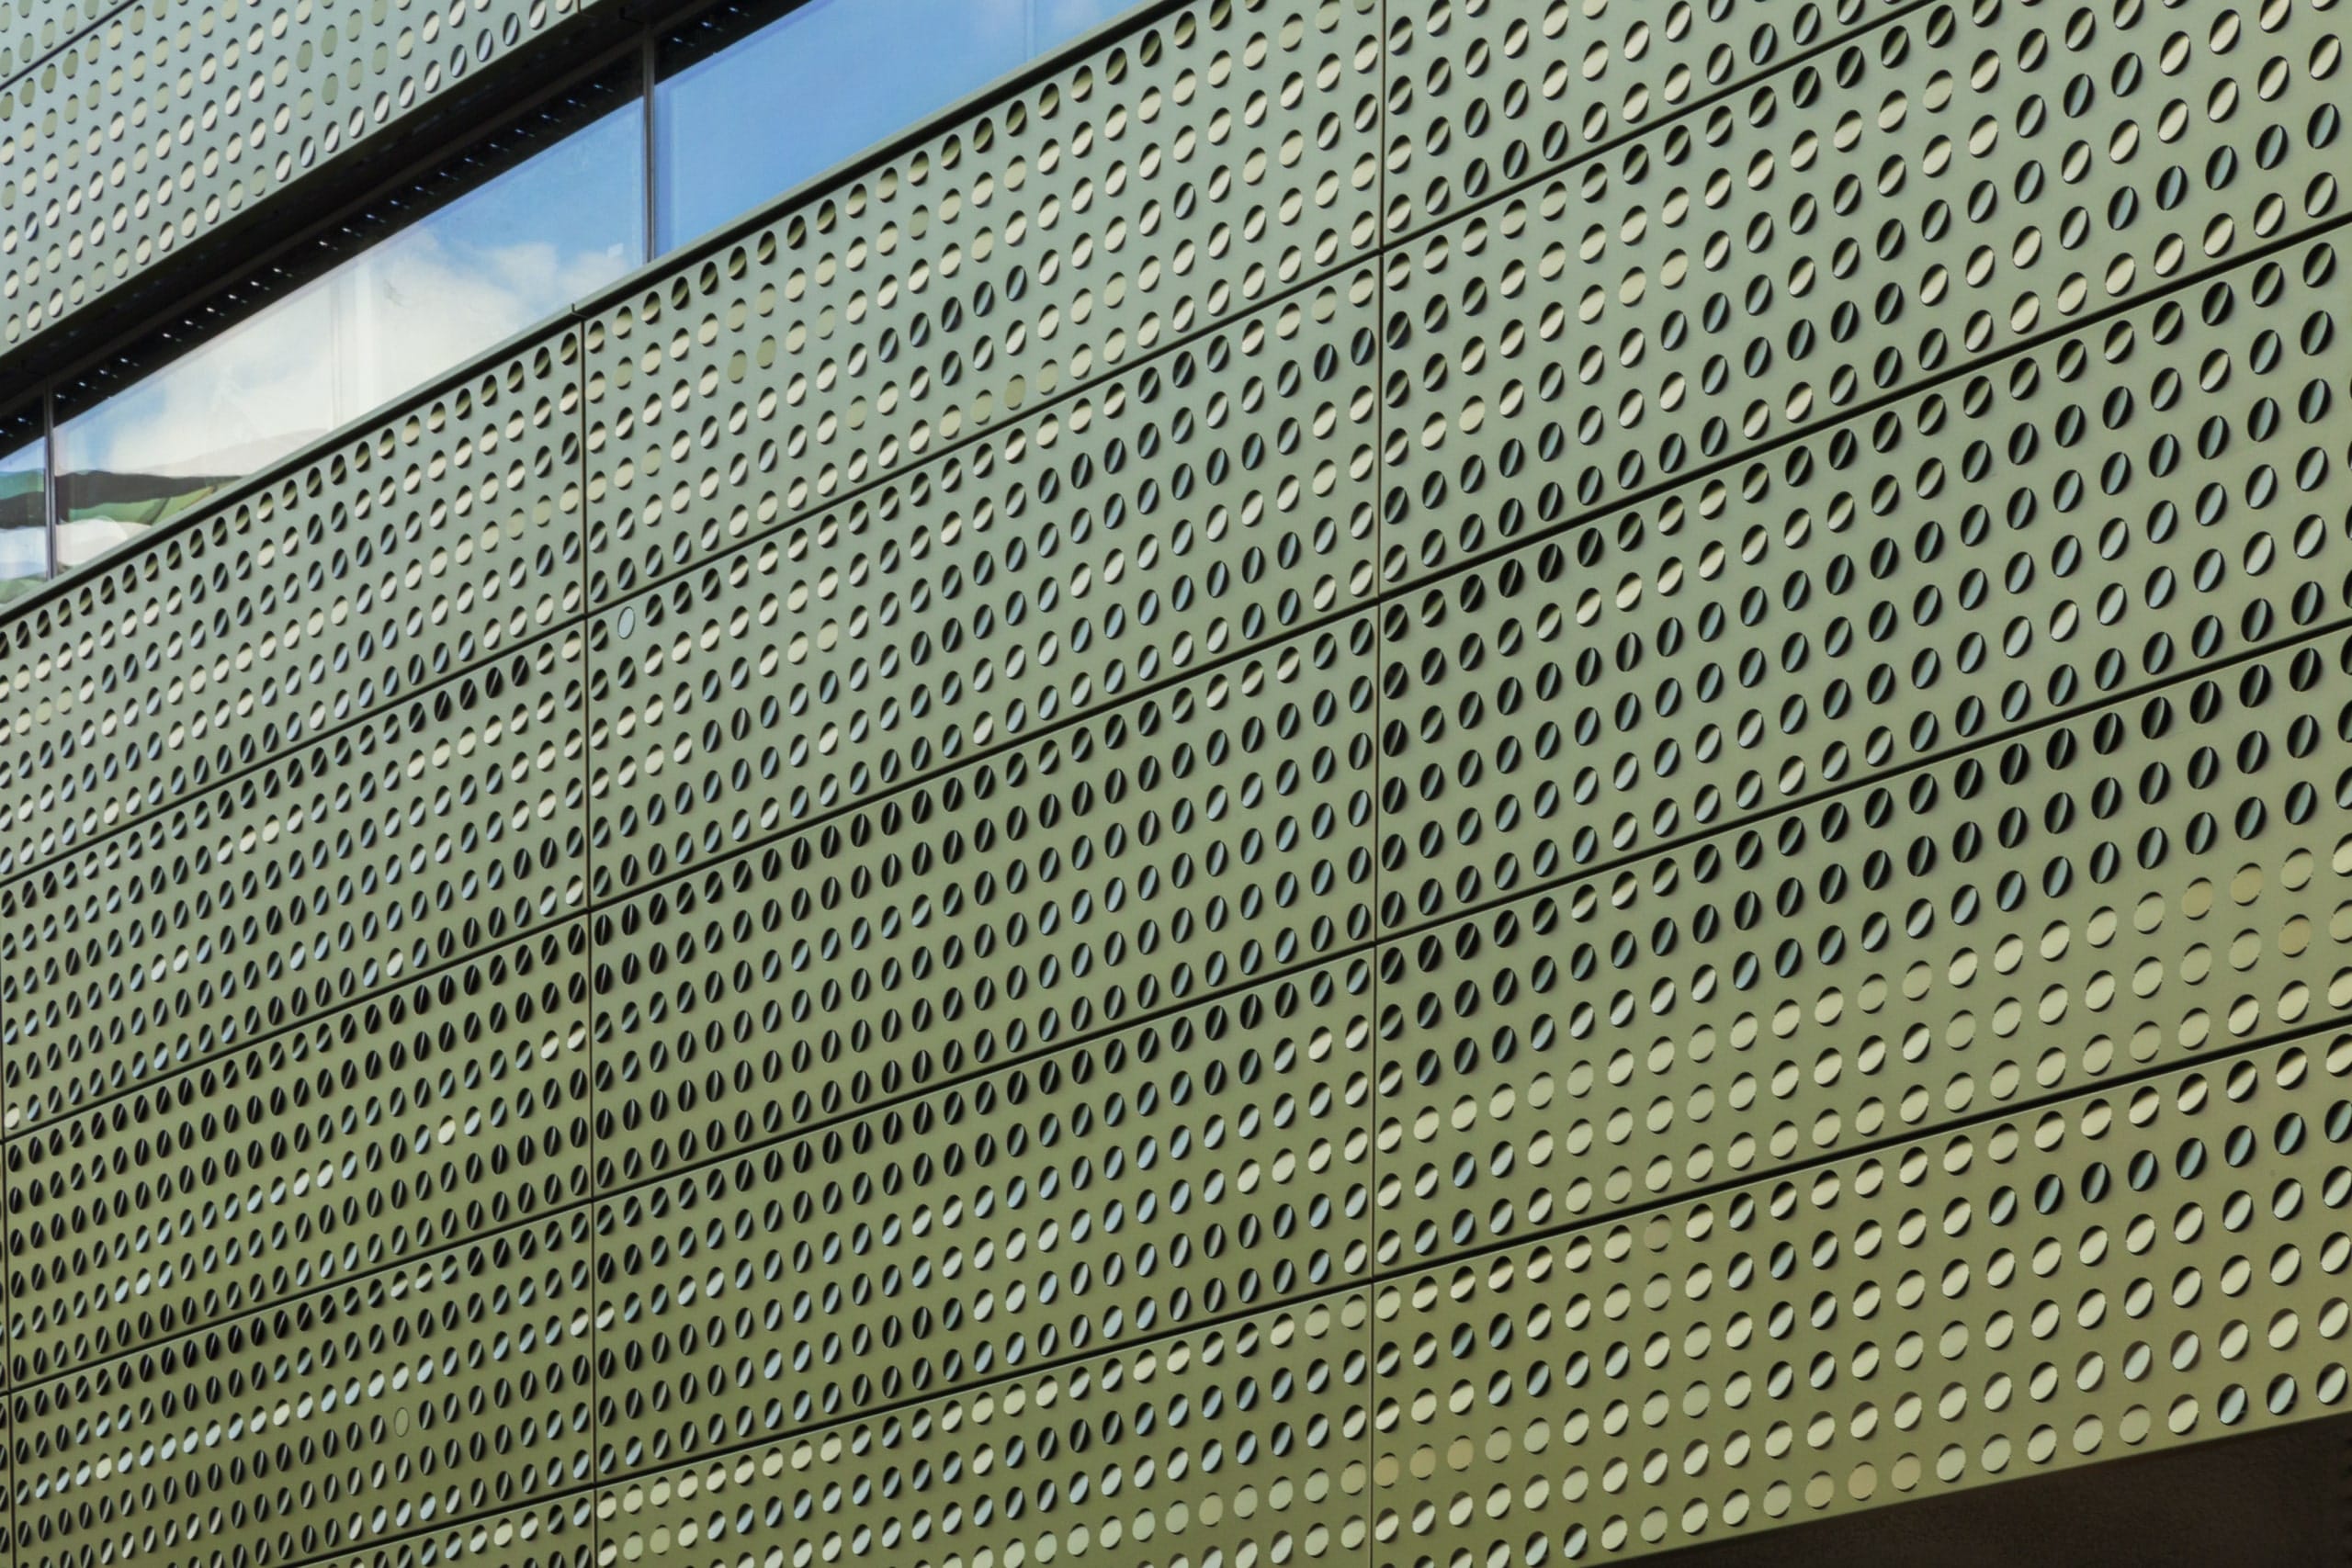 Image-perforated metal with color-shift iridescent painted aluminum.